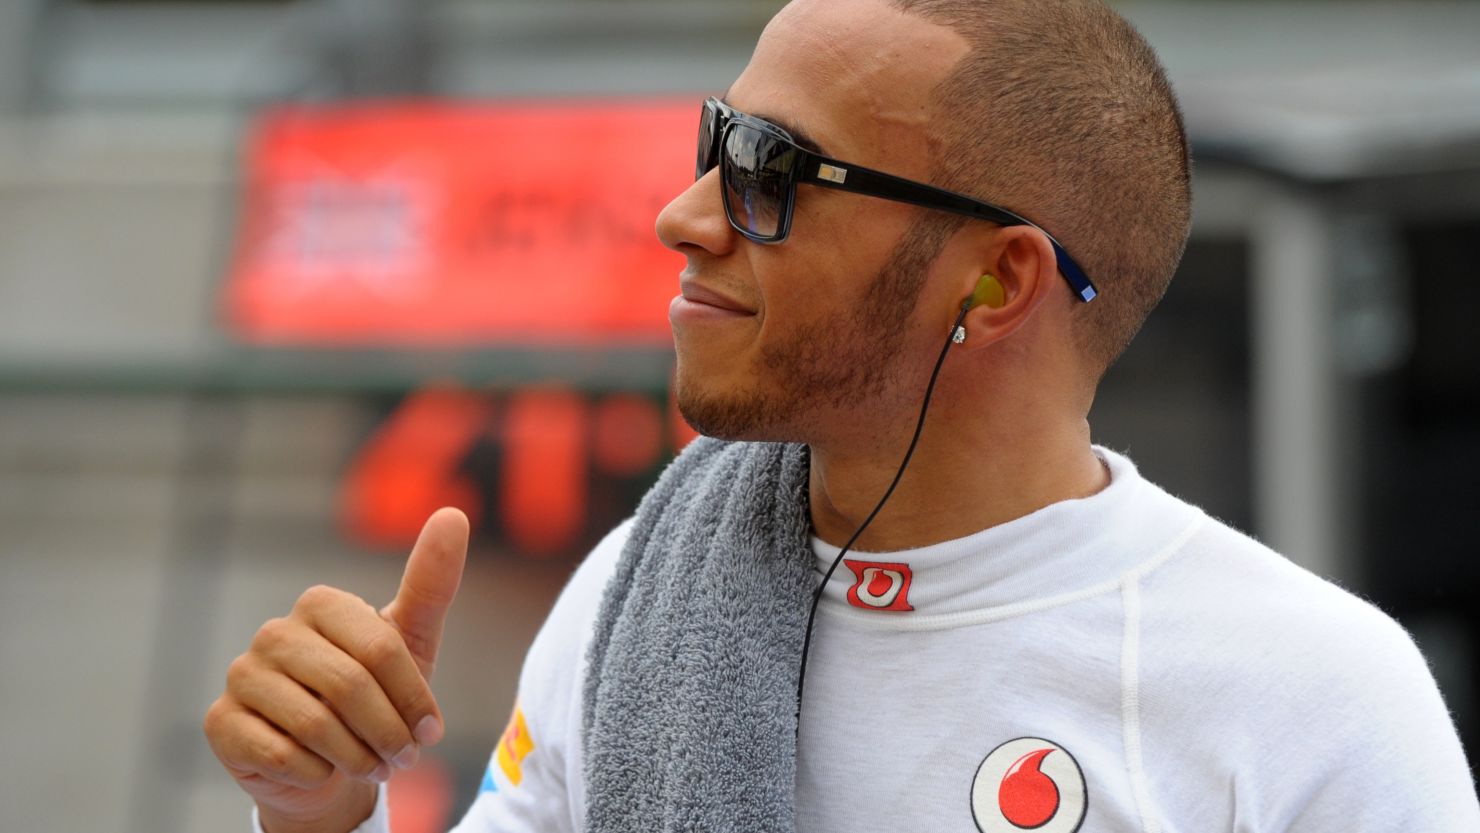 Lewis Hamilton has set the early pace in practice for Sunday's Italian Grand Prix.